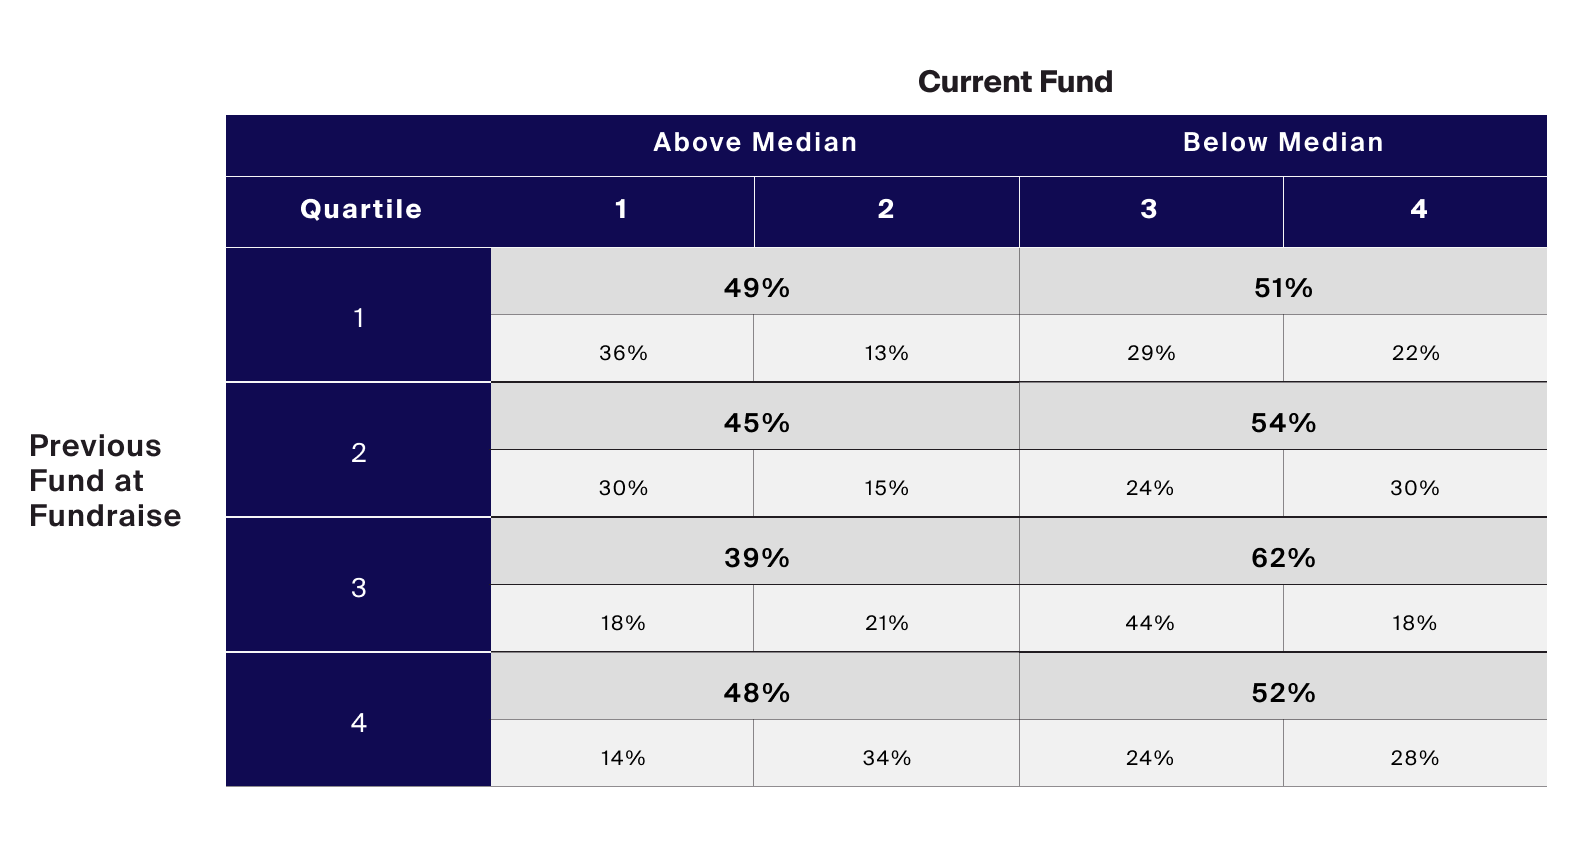 Funds in the top quartile were not more likely to perform above the median in the subsequent fund